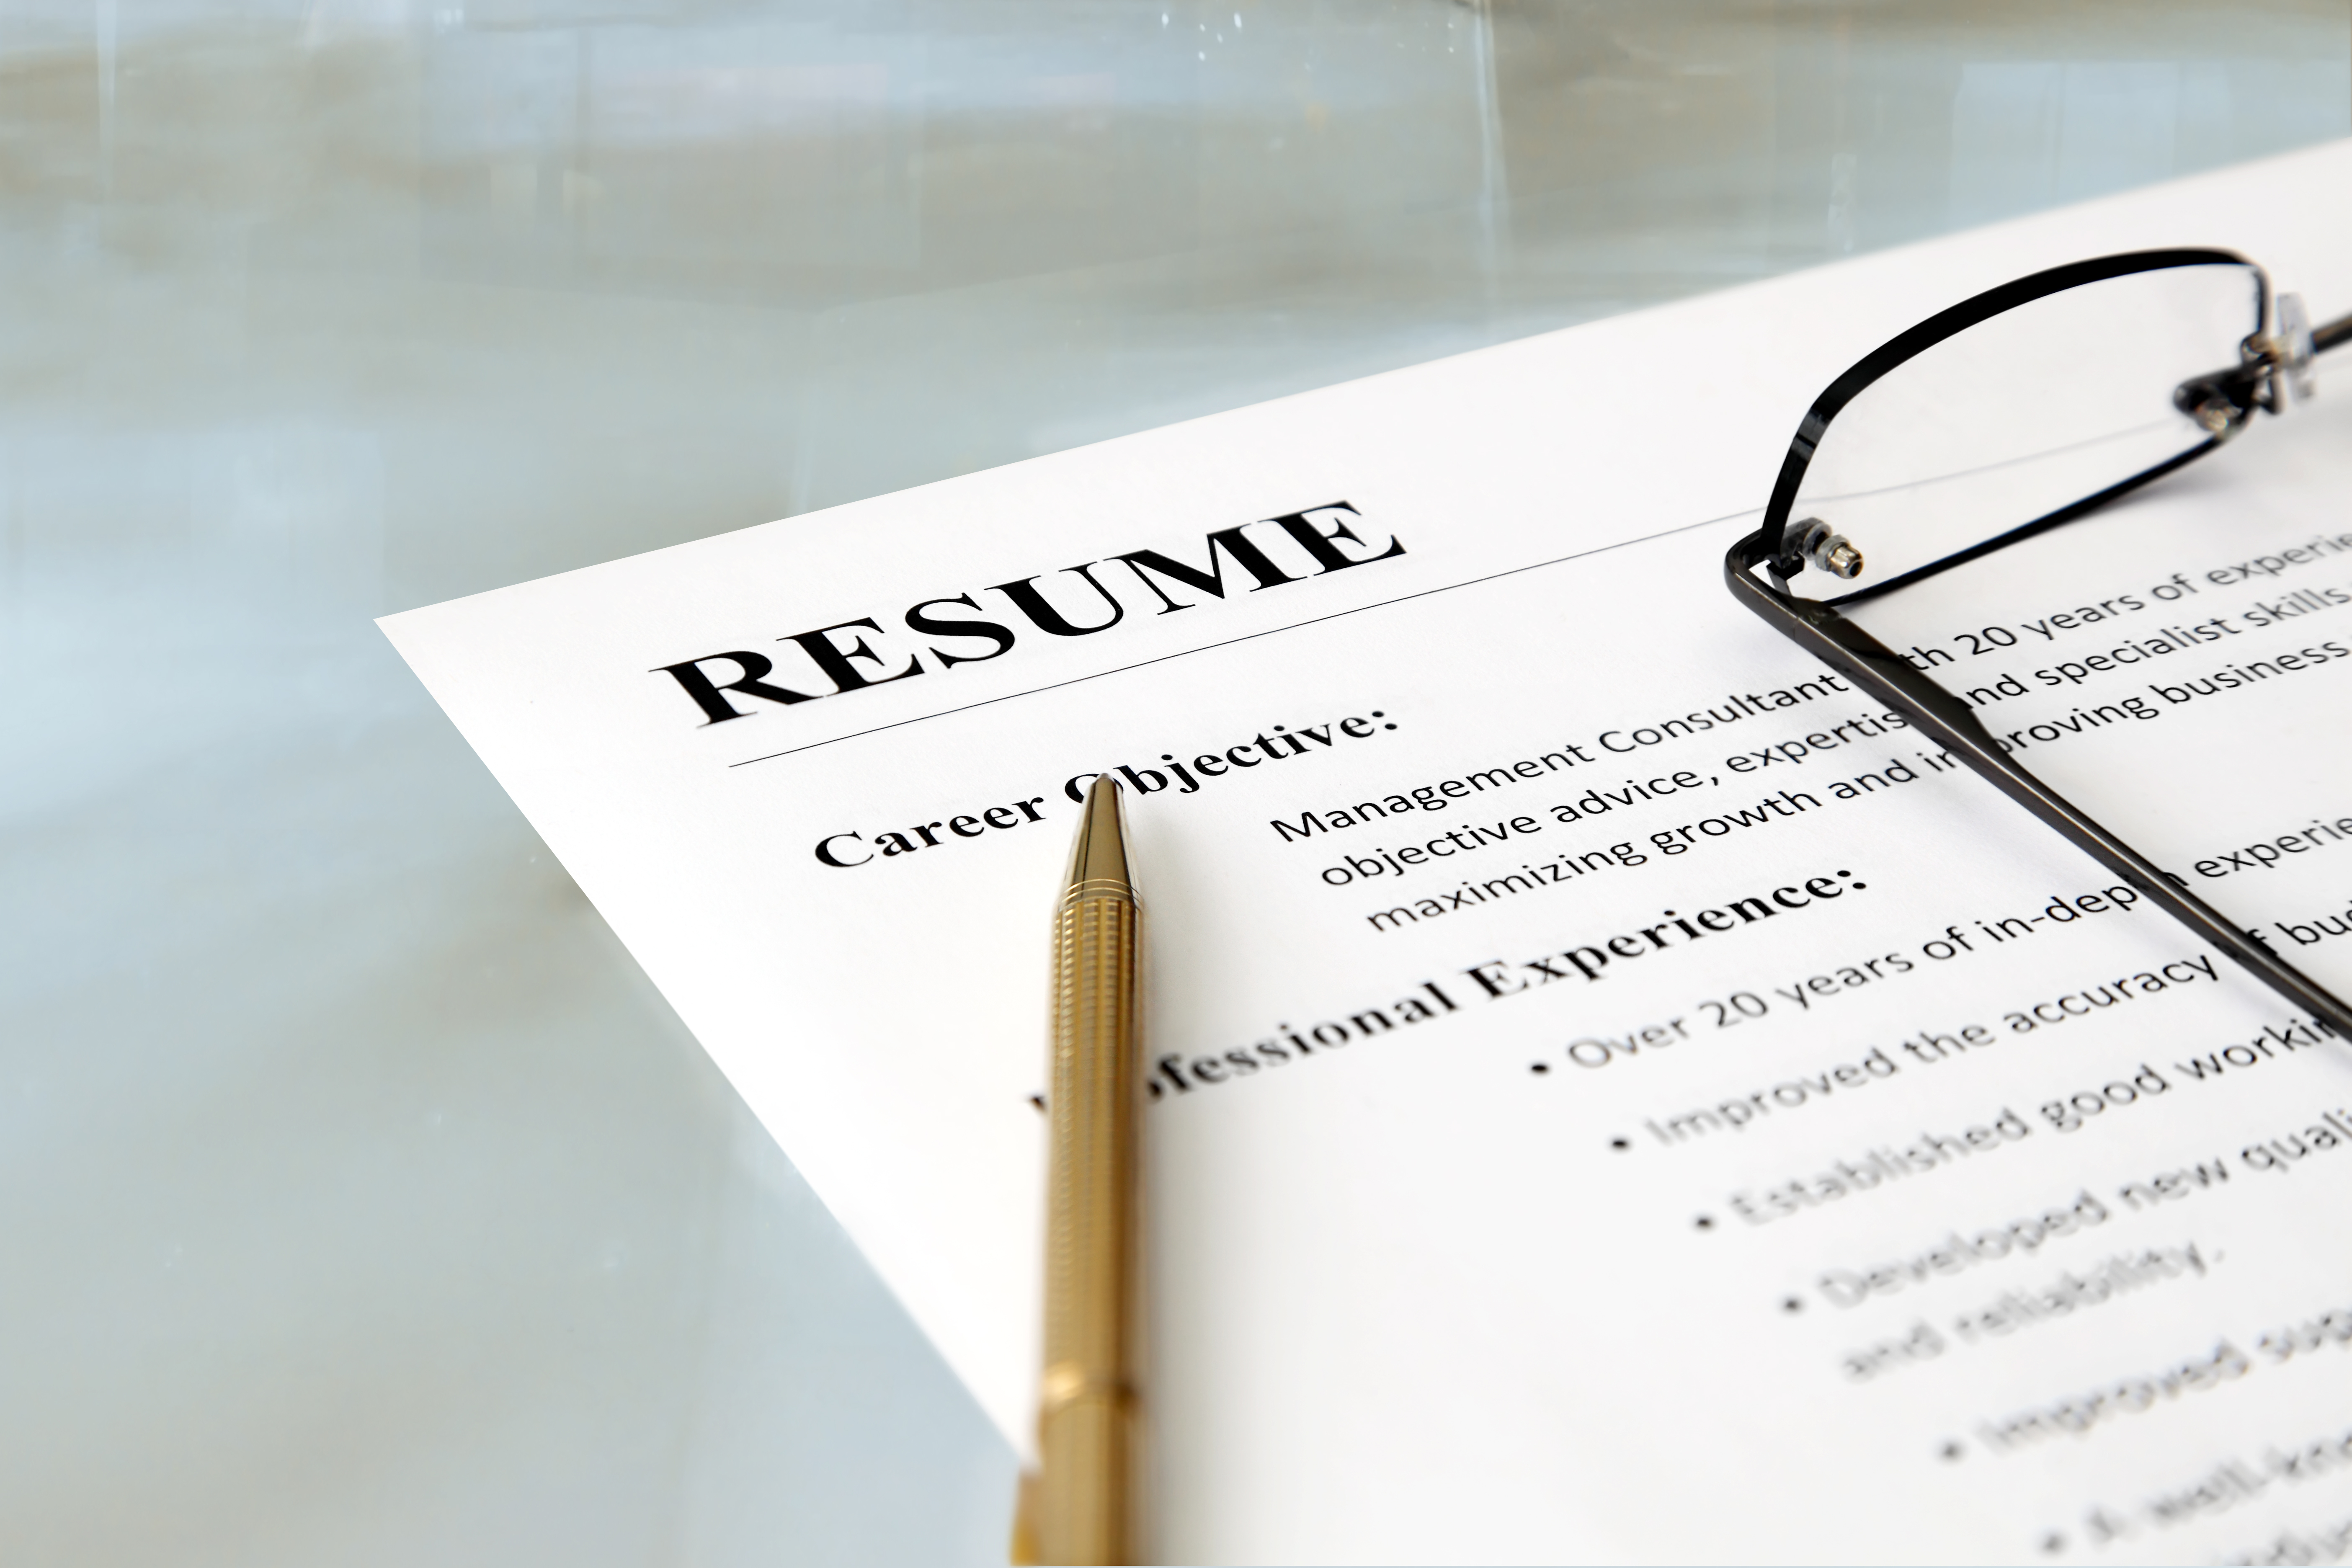 senior executive management resume services and interview coaching